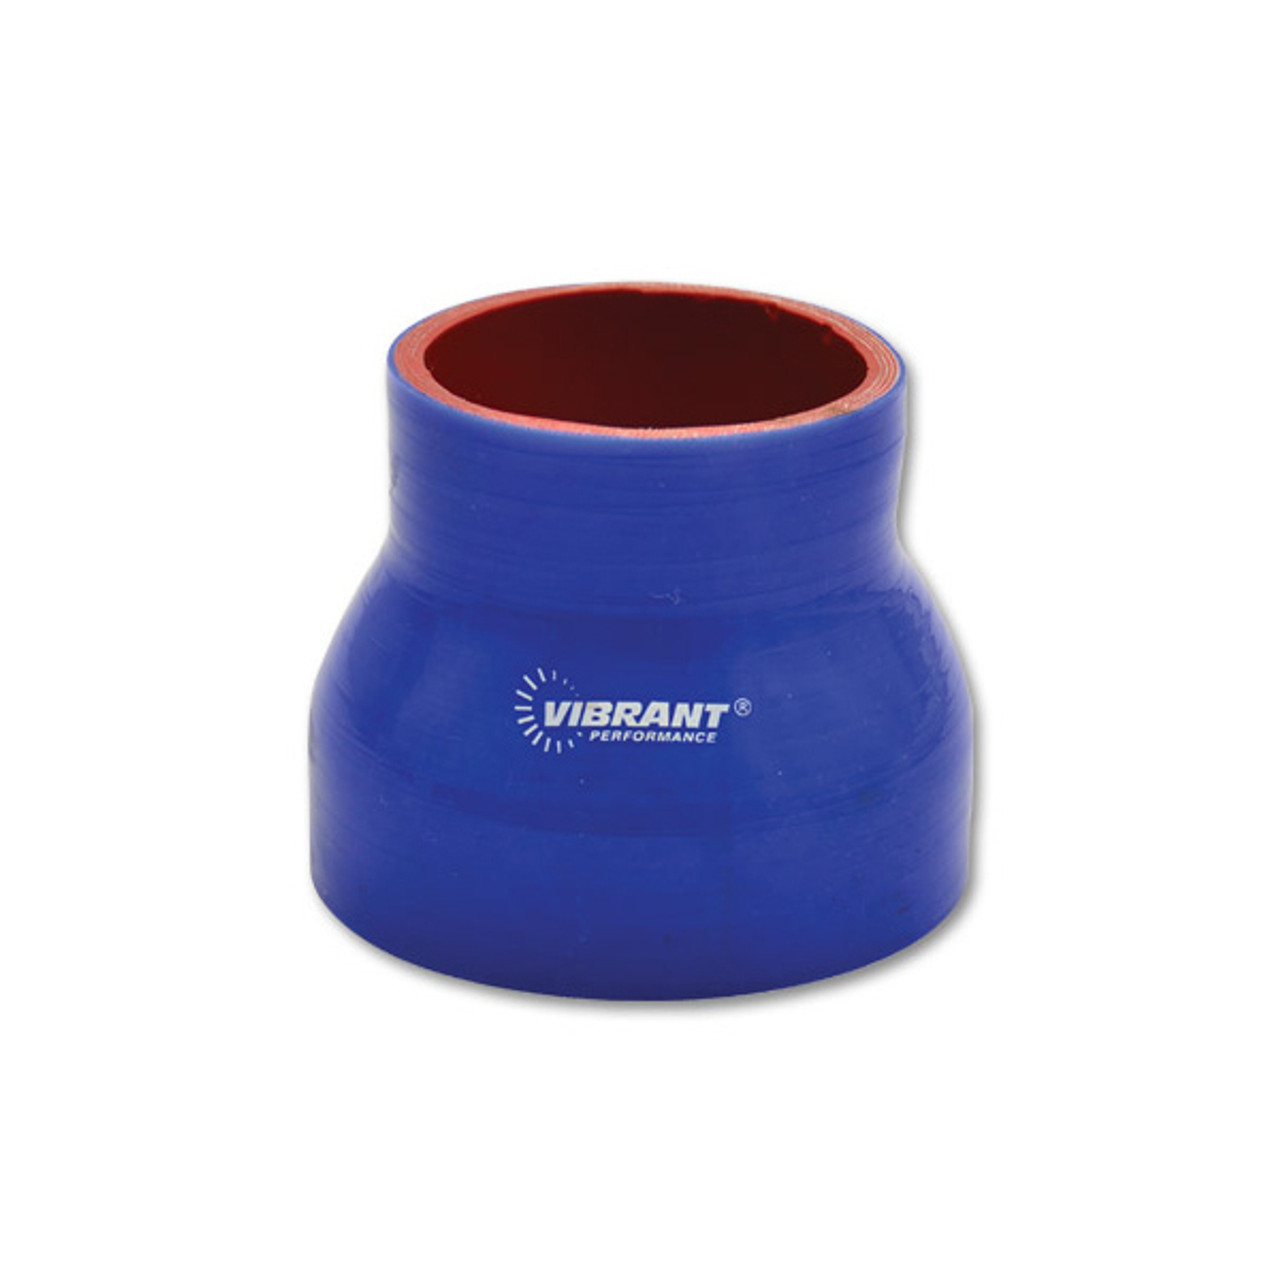 Vibrant Performance 4 Ply Reducer Coupling 2 .75in x 3in x 3in long